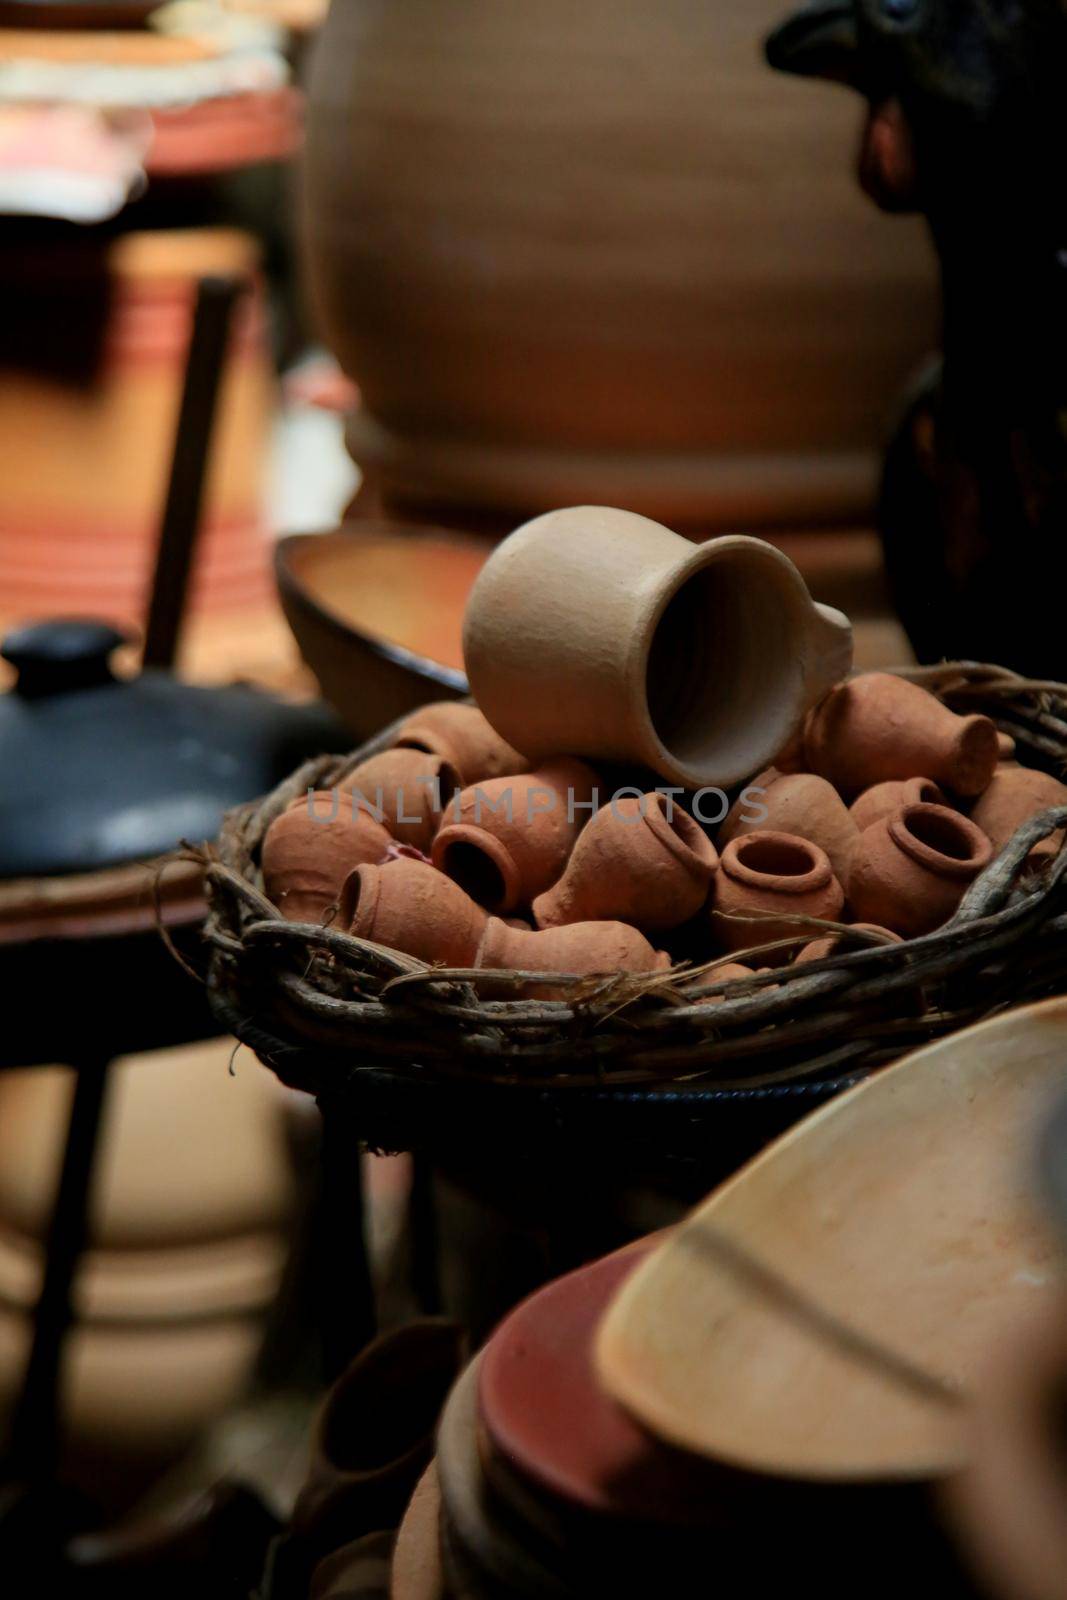 salvador, bahia, brazil - june 28, 2021: pieces made of clay in pottery are seen for sale at the Sao Joaquim fair in the city of Salvador.
